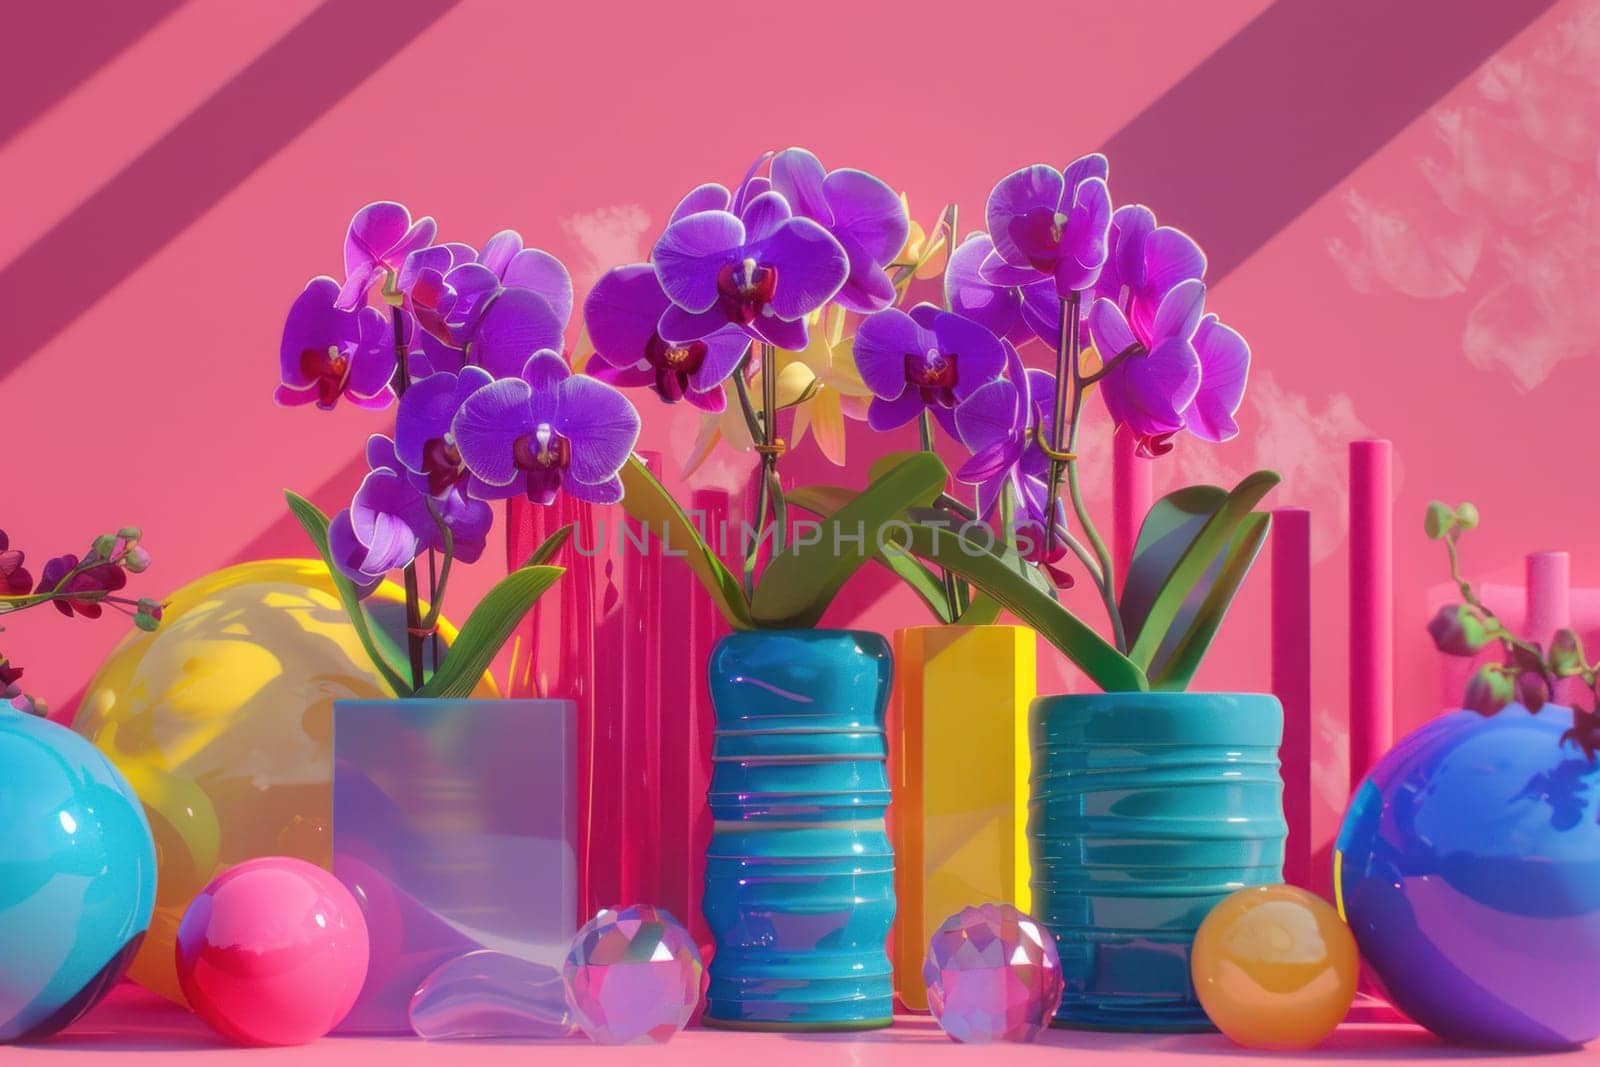 Purple flowers in vase and objects on pink background, still life composition for beauty or art concept by Vichizh